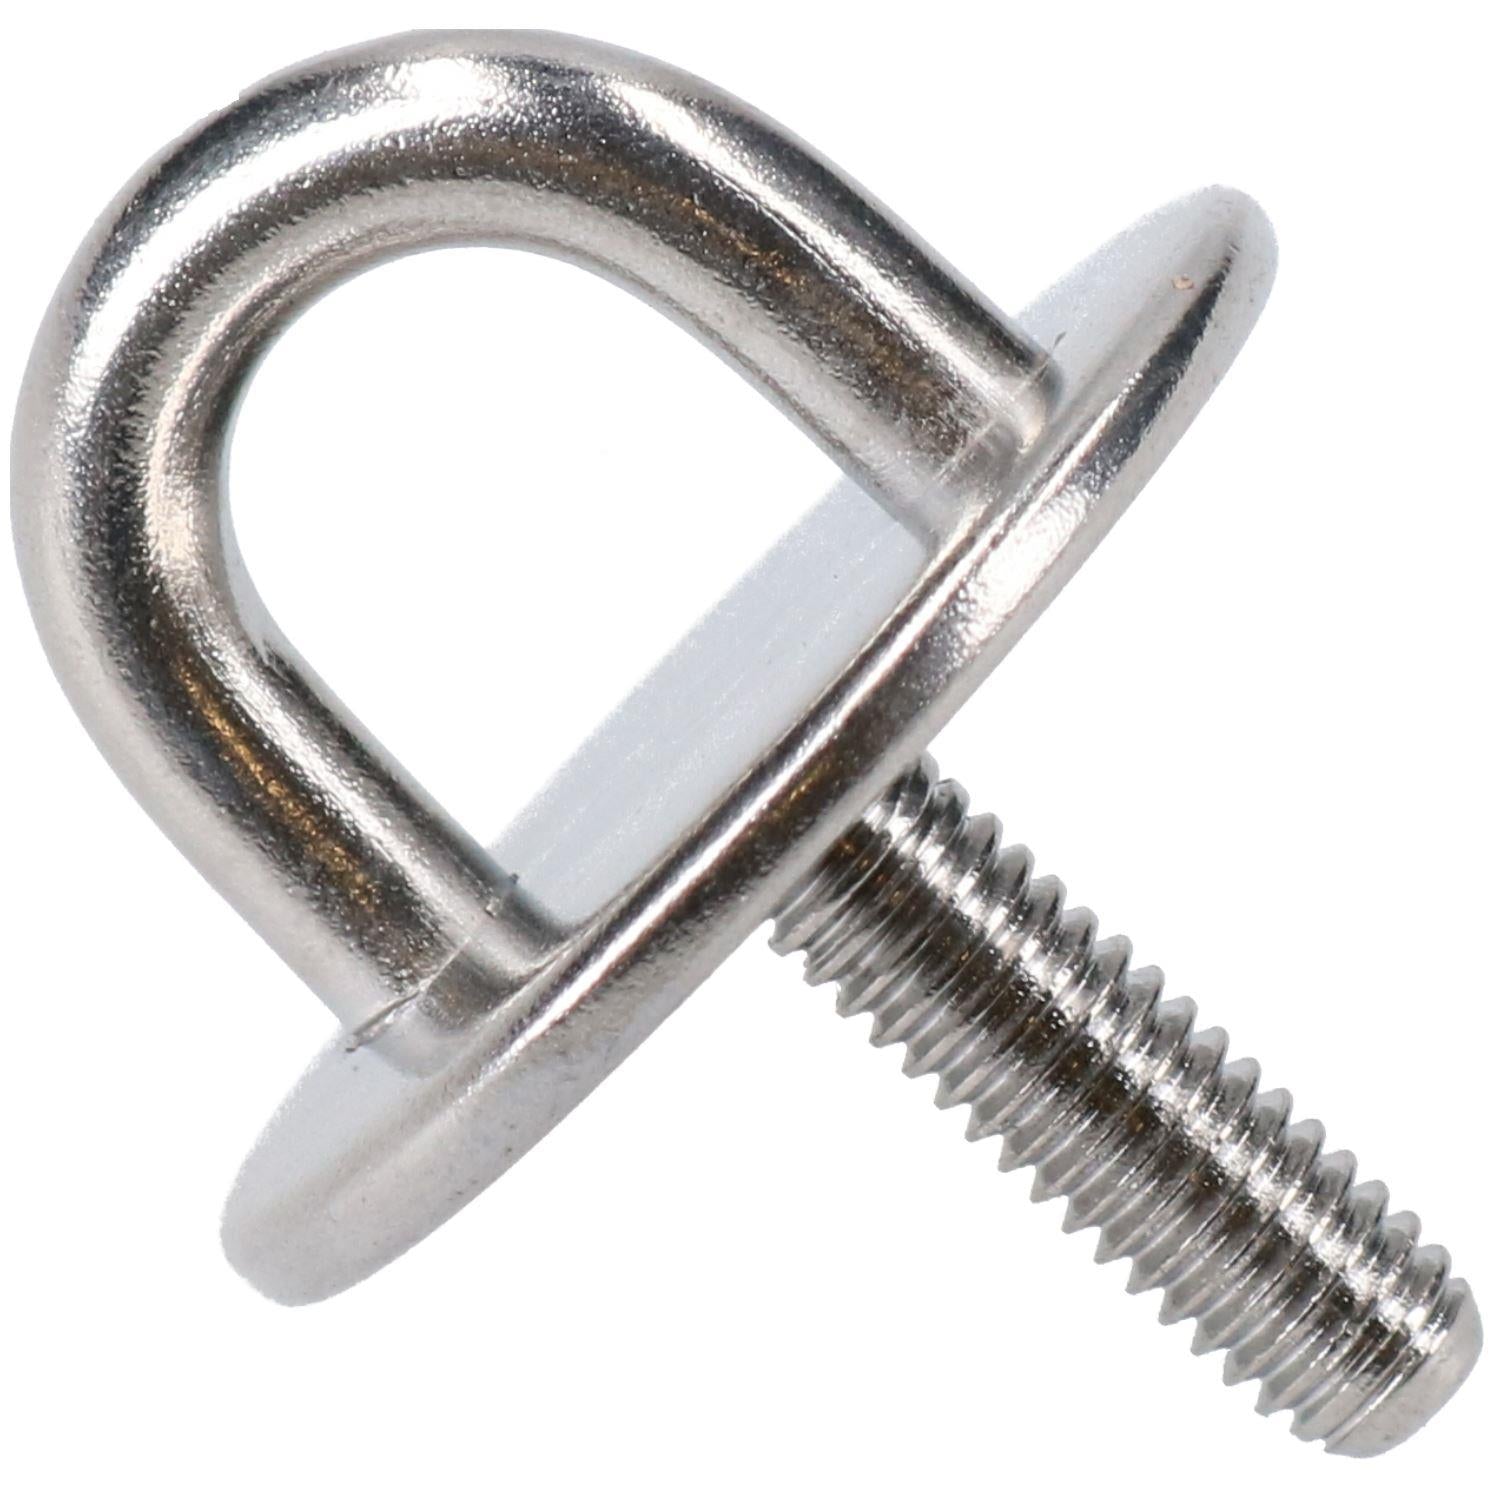 Round Pad Eye Tie Down Anchor Ring Stainless Steel M6 Thread